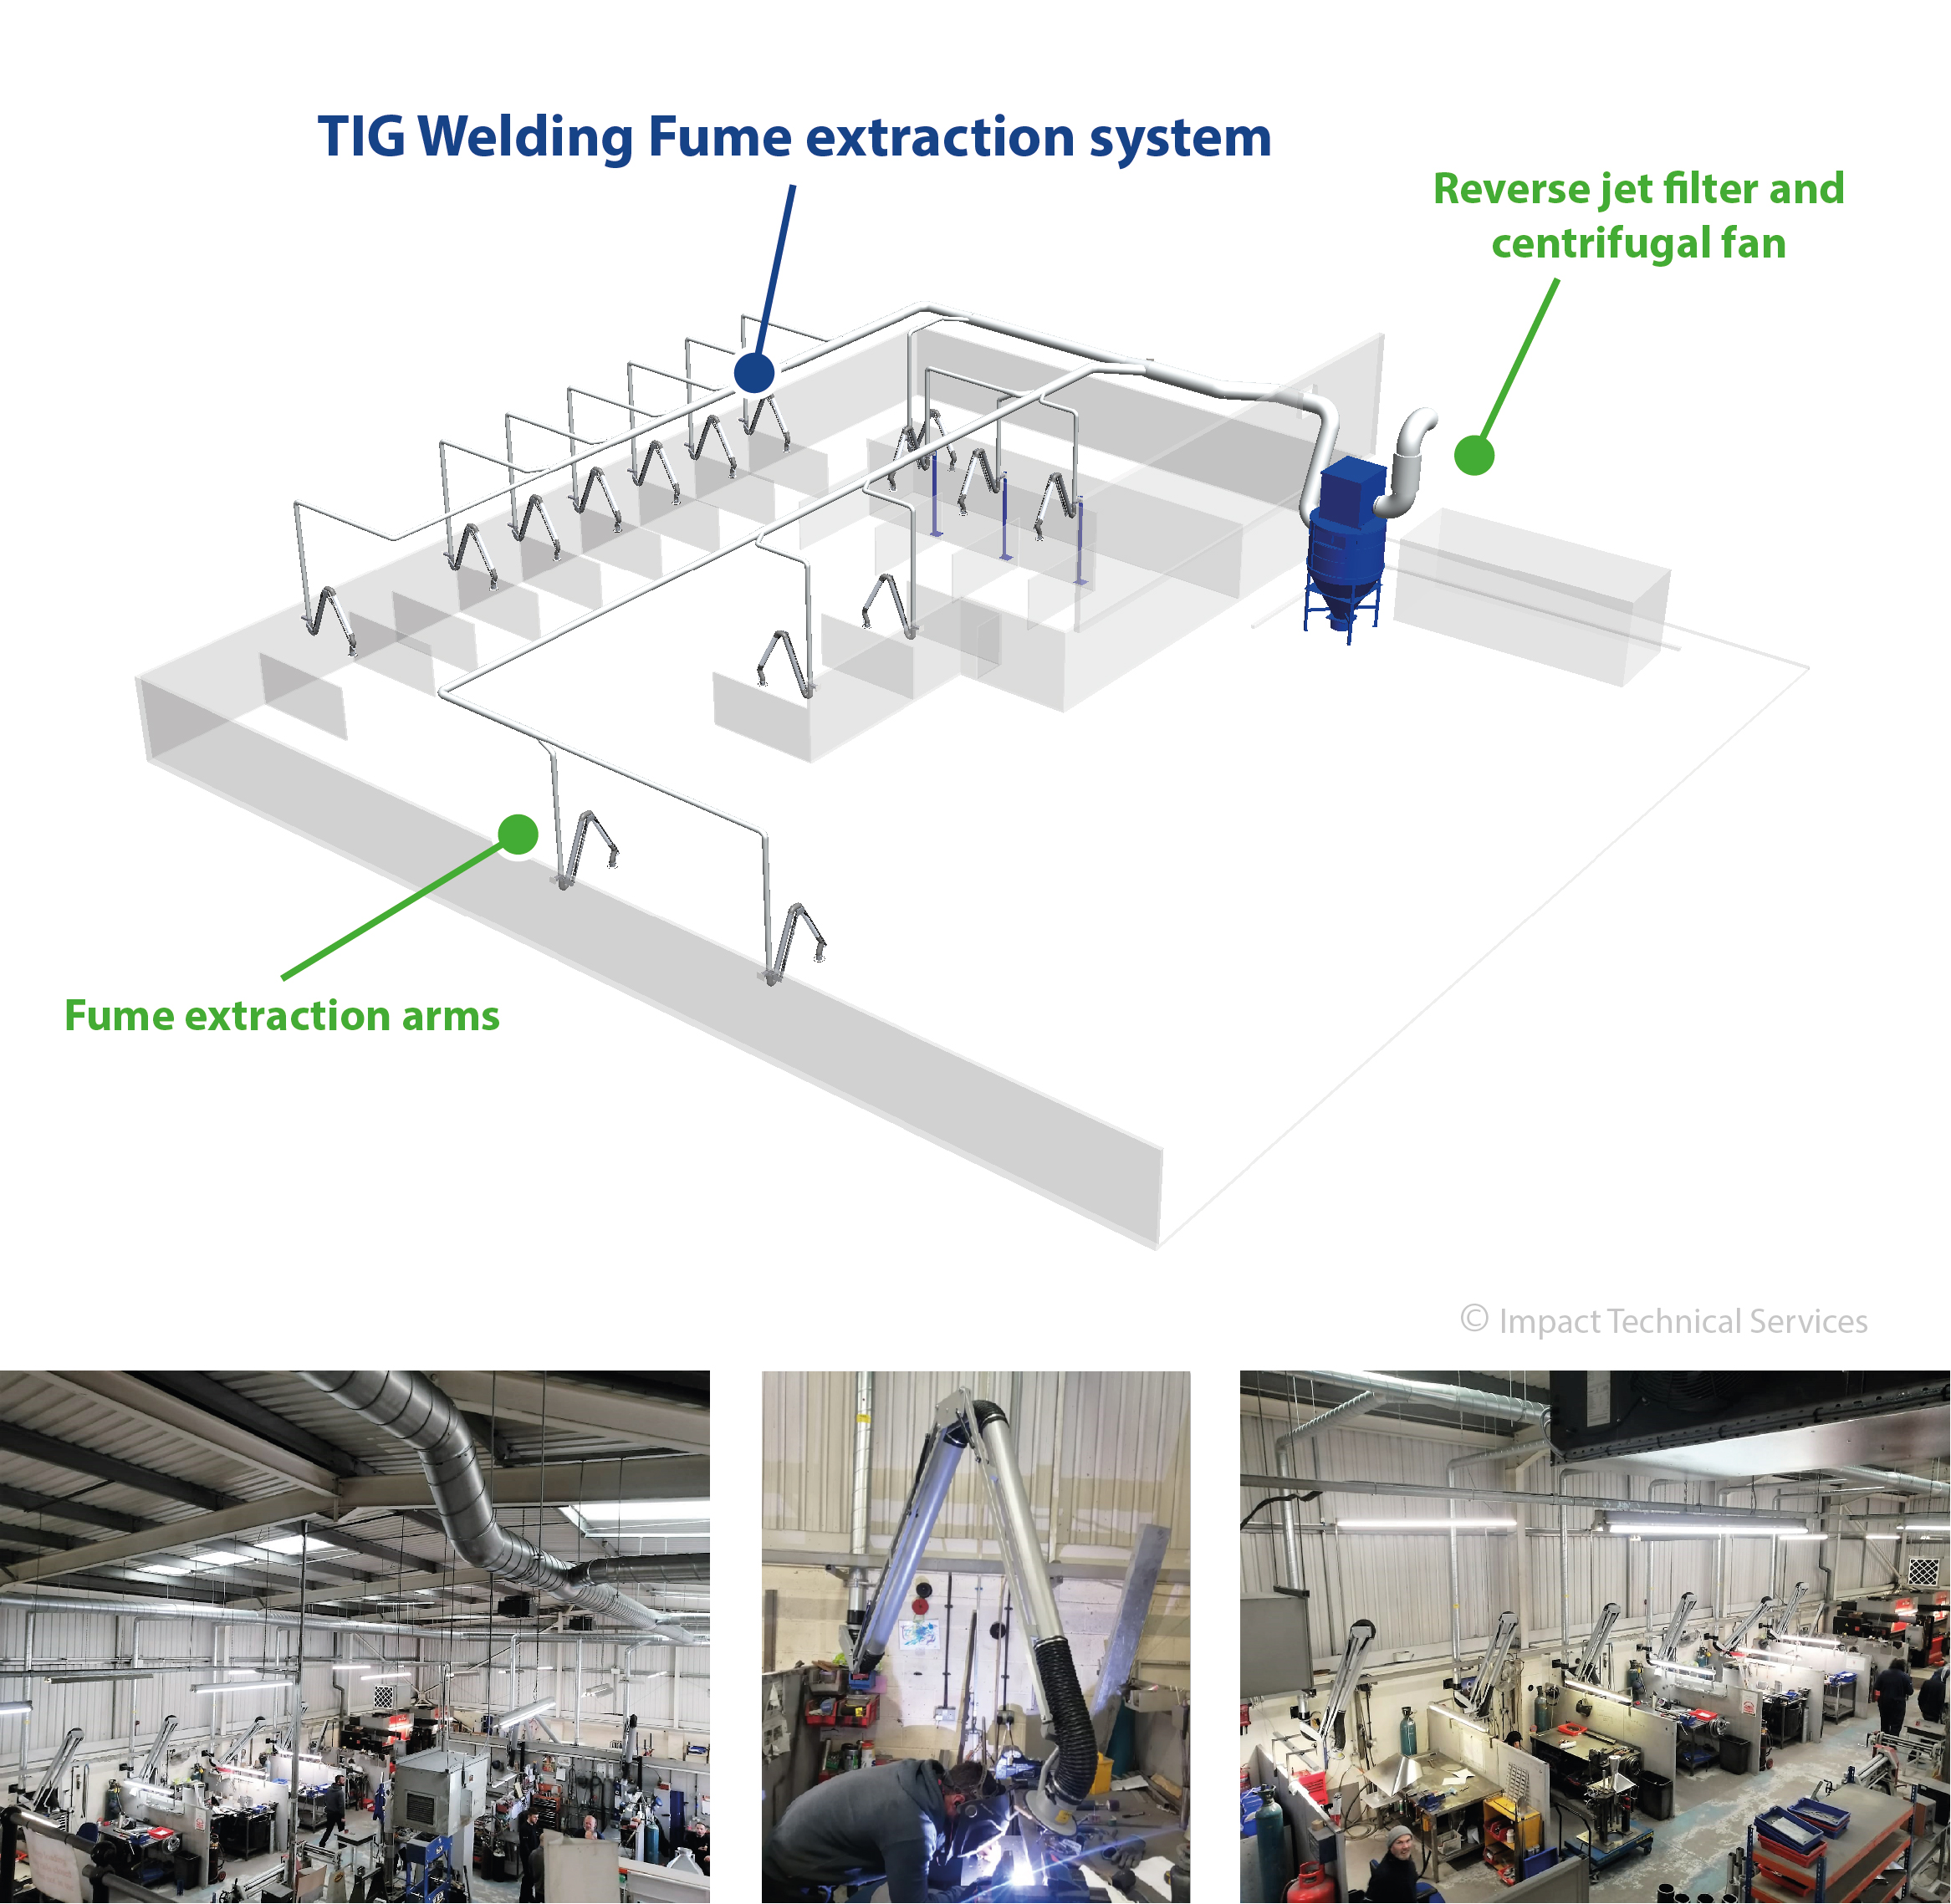 TIG welding fume extraction system